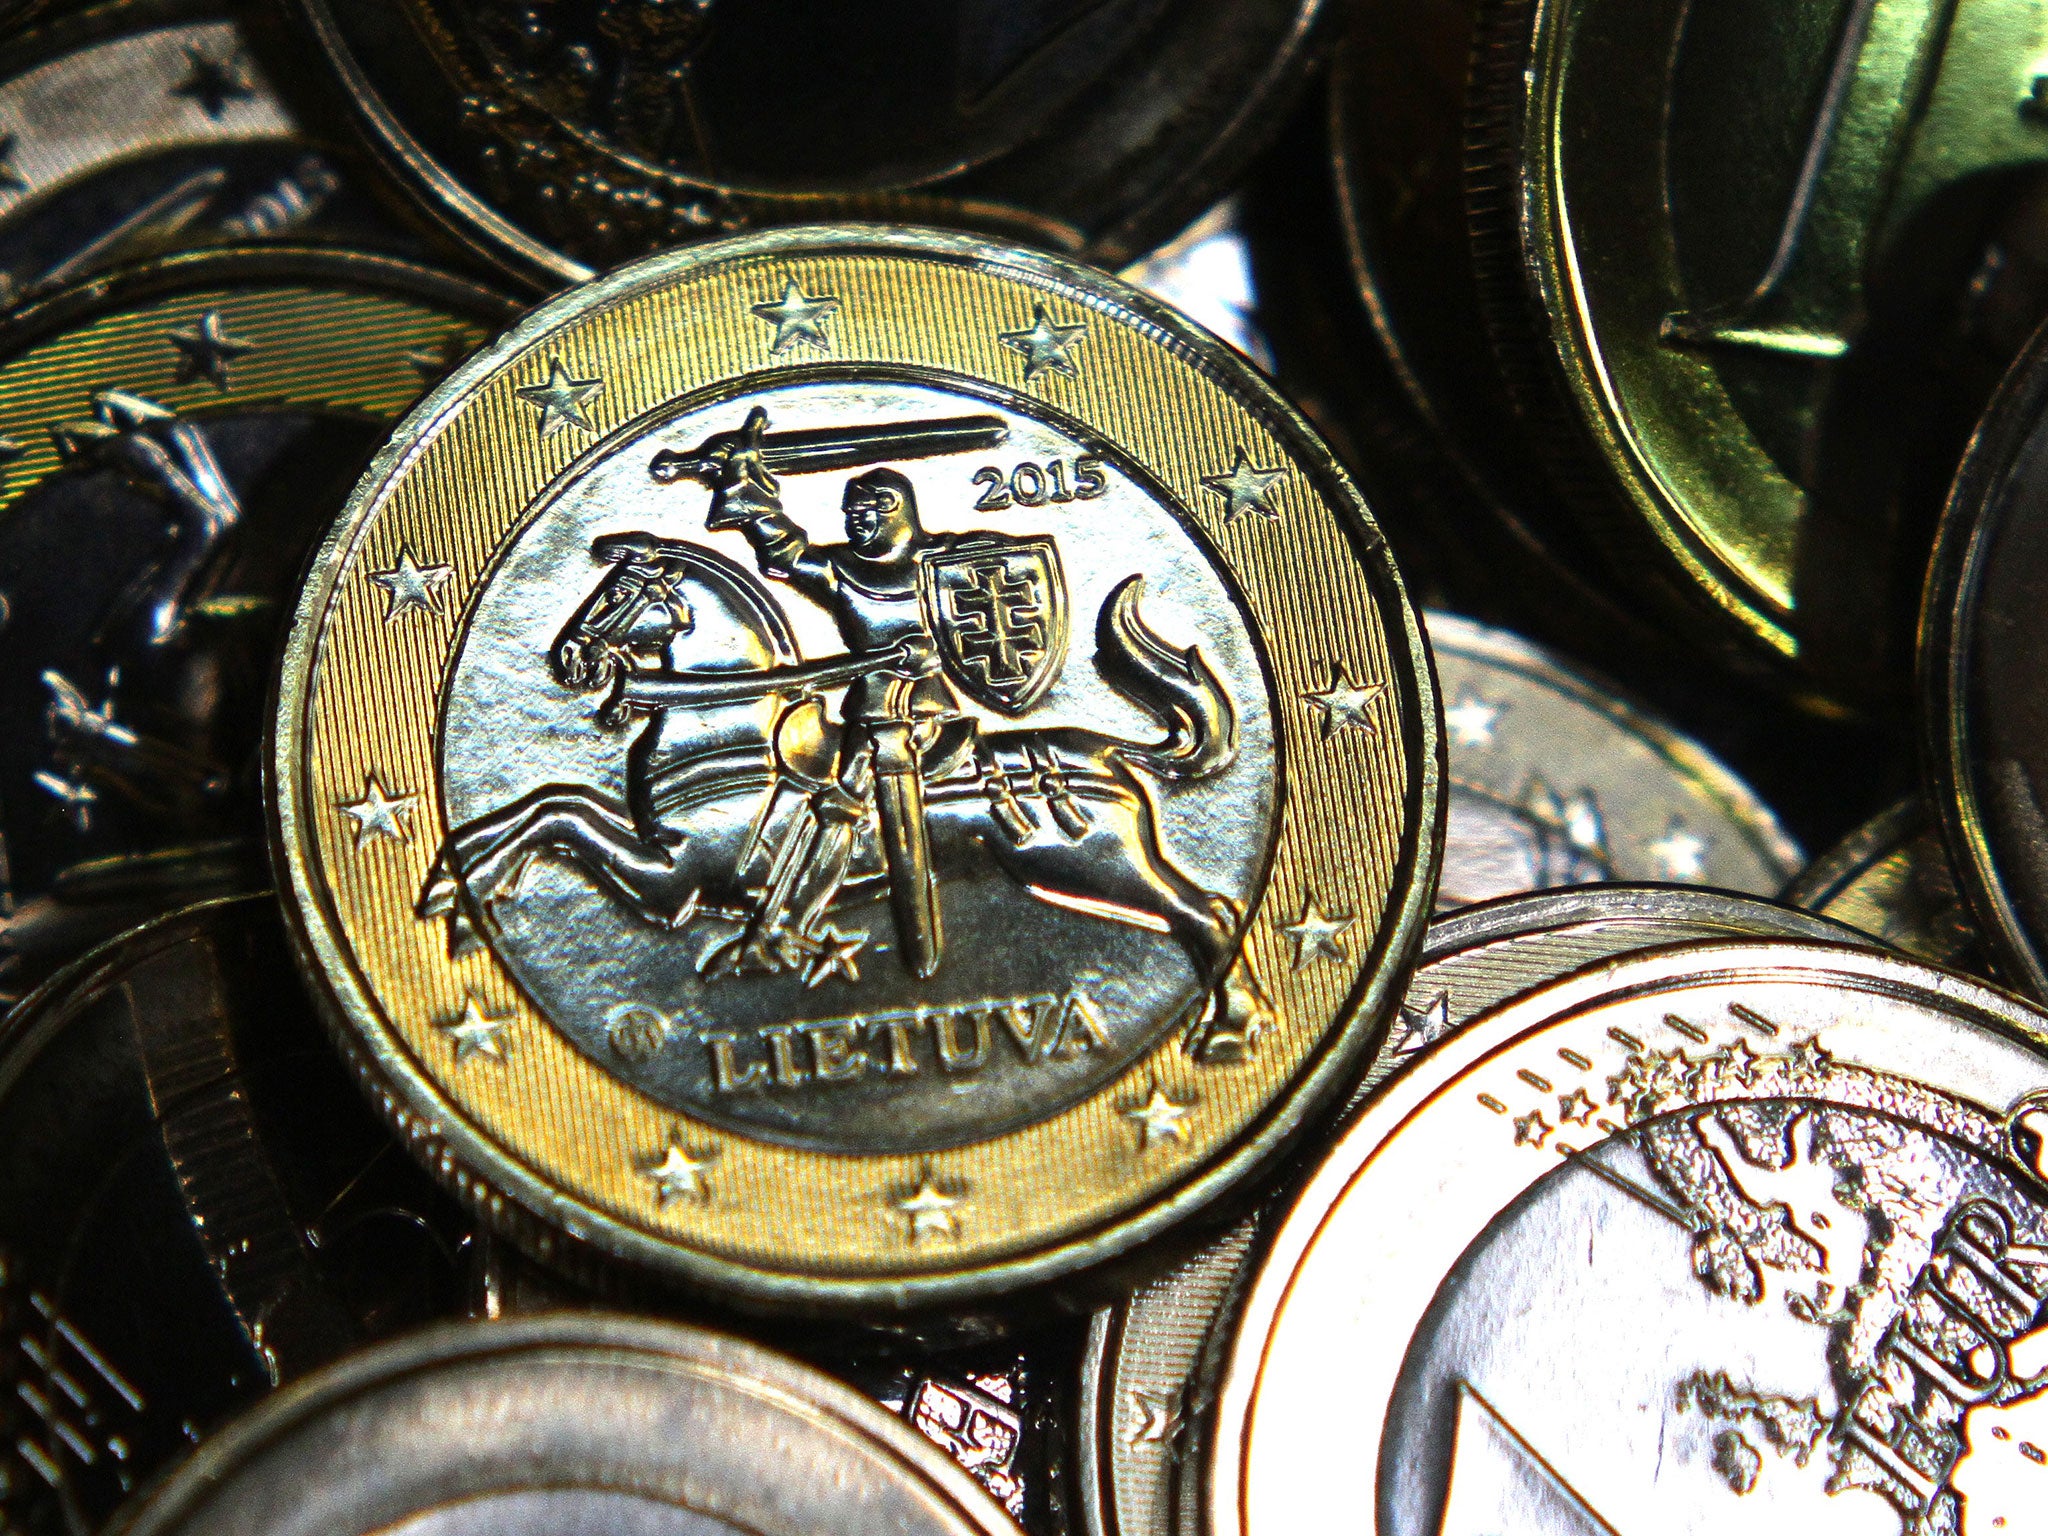 A Lithuanian one euro coin